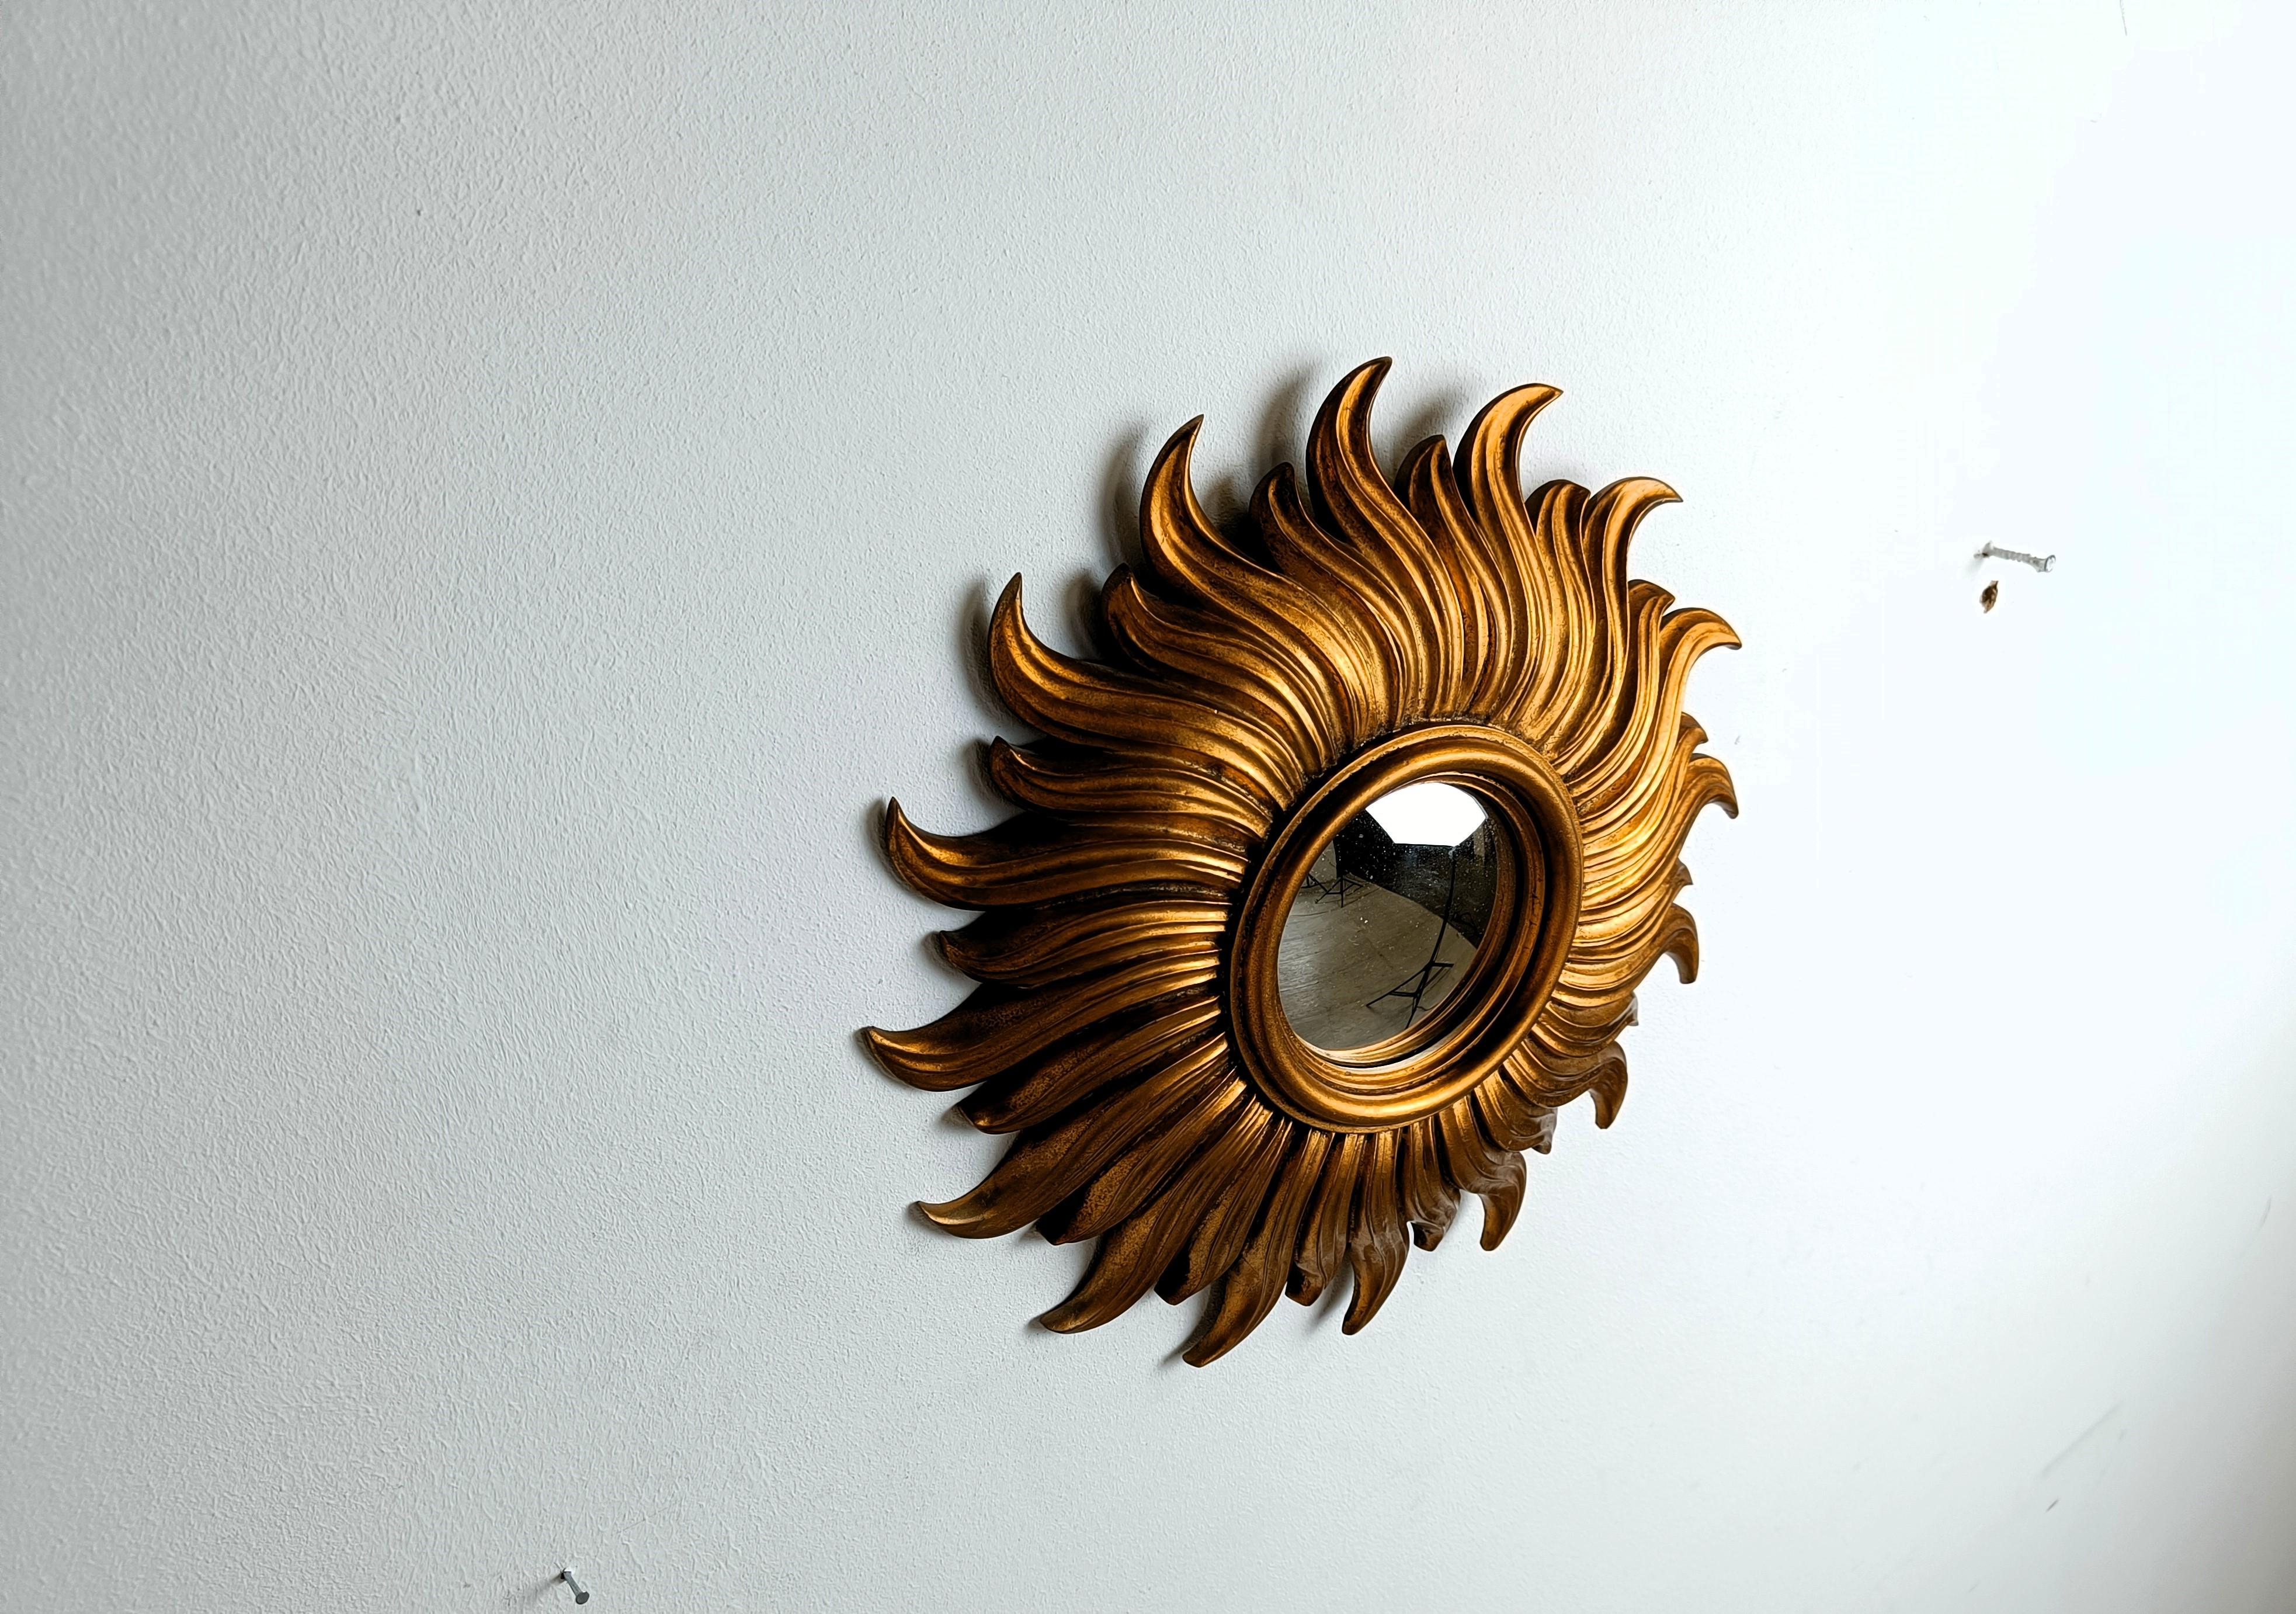 Gilded resin sunburst mirror with convex mirror glass.

The golden mirror is in a good condition.

1960s - made in Belgium.

Dimensions:
Diameter: 35cm

Ref.:  87456414

Ref.: 1